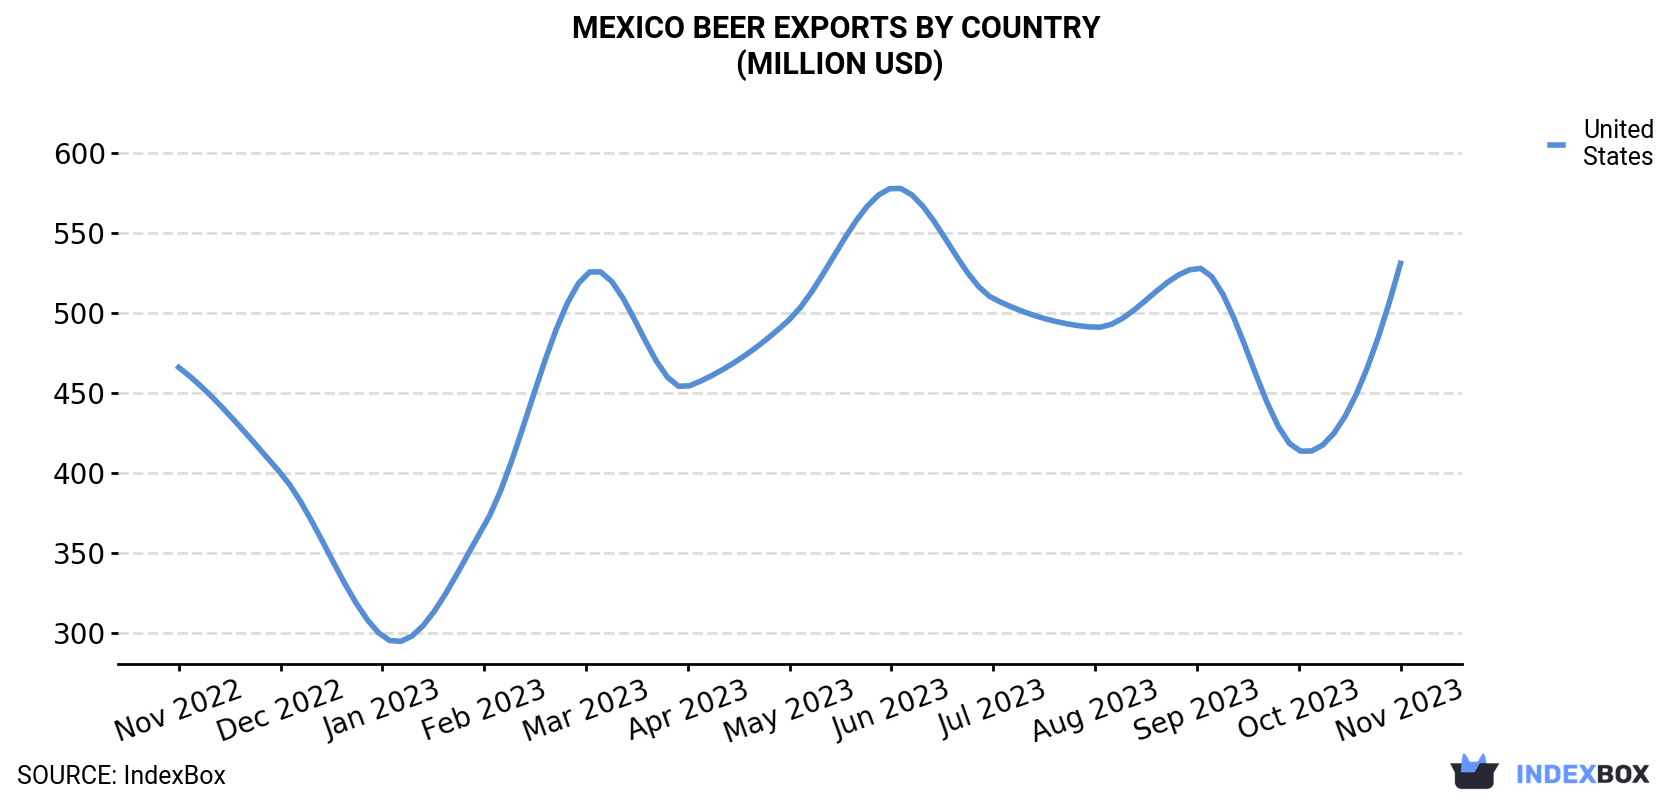 Mexico Beer Exports By Country (Million USD)